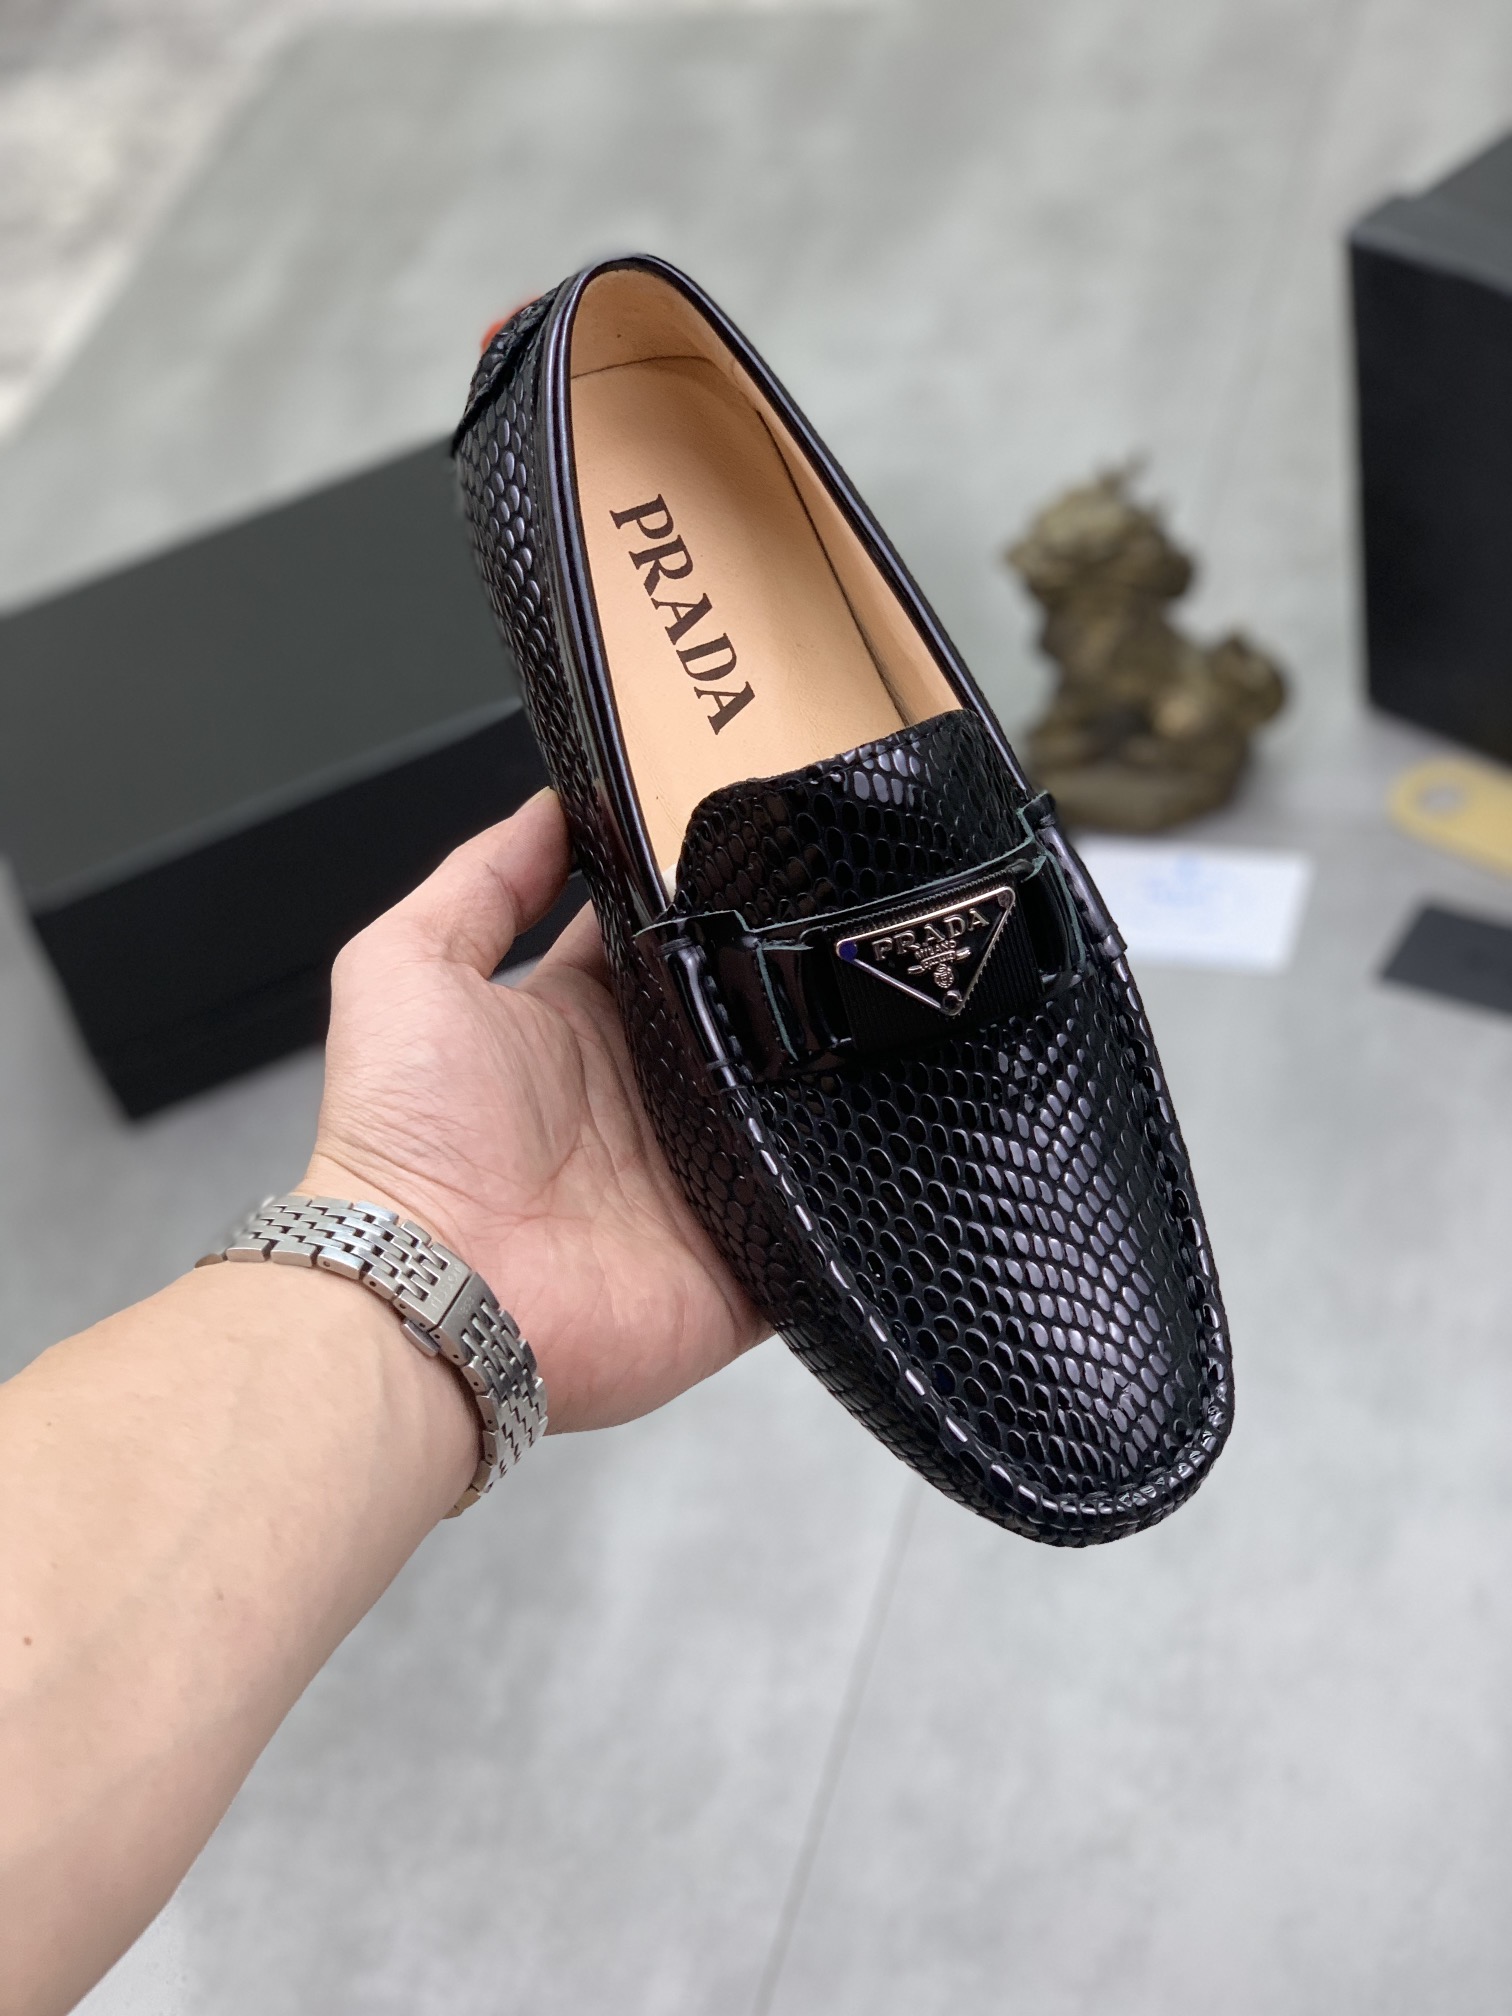 [Real price] (Can be customized in real wool +10) [PRADA] PRADA Hong Kong high-quality bean shoes. L